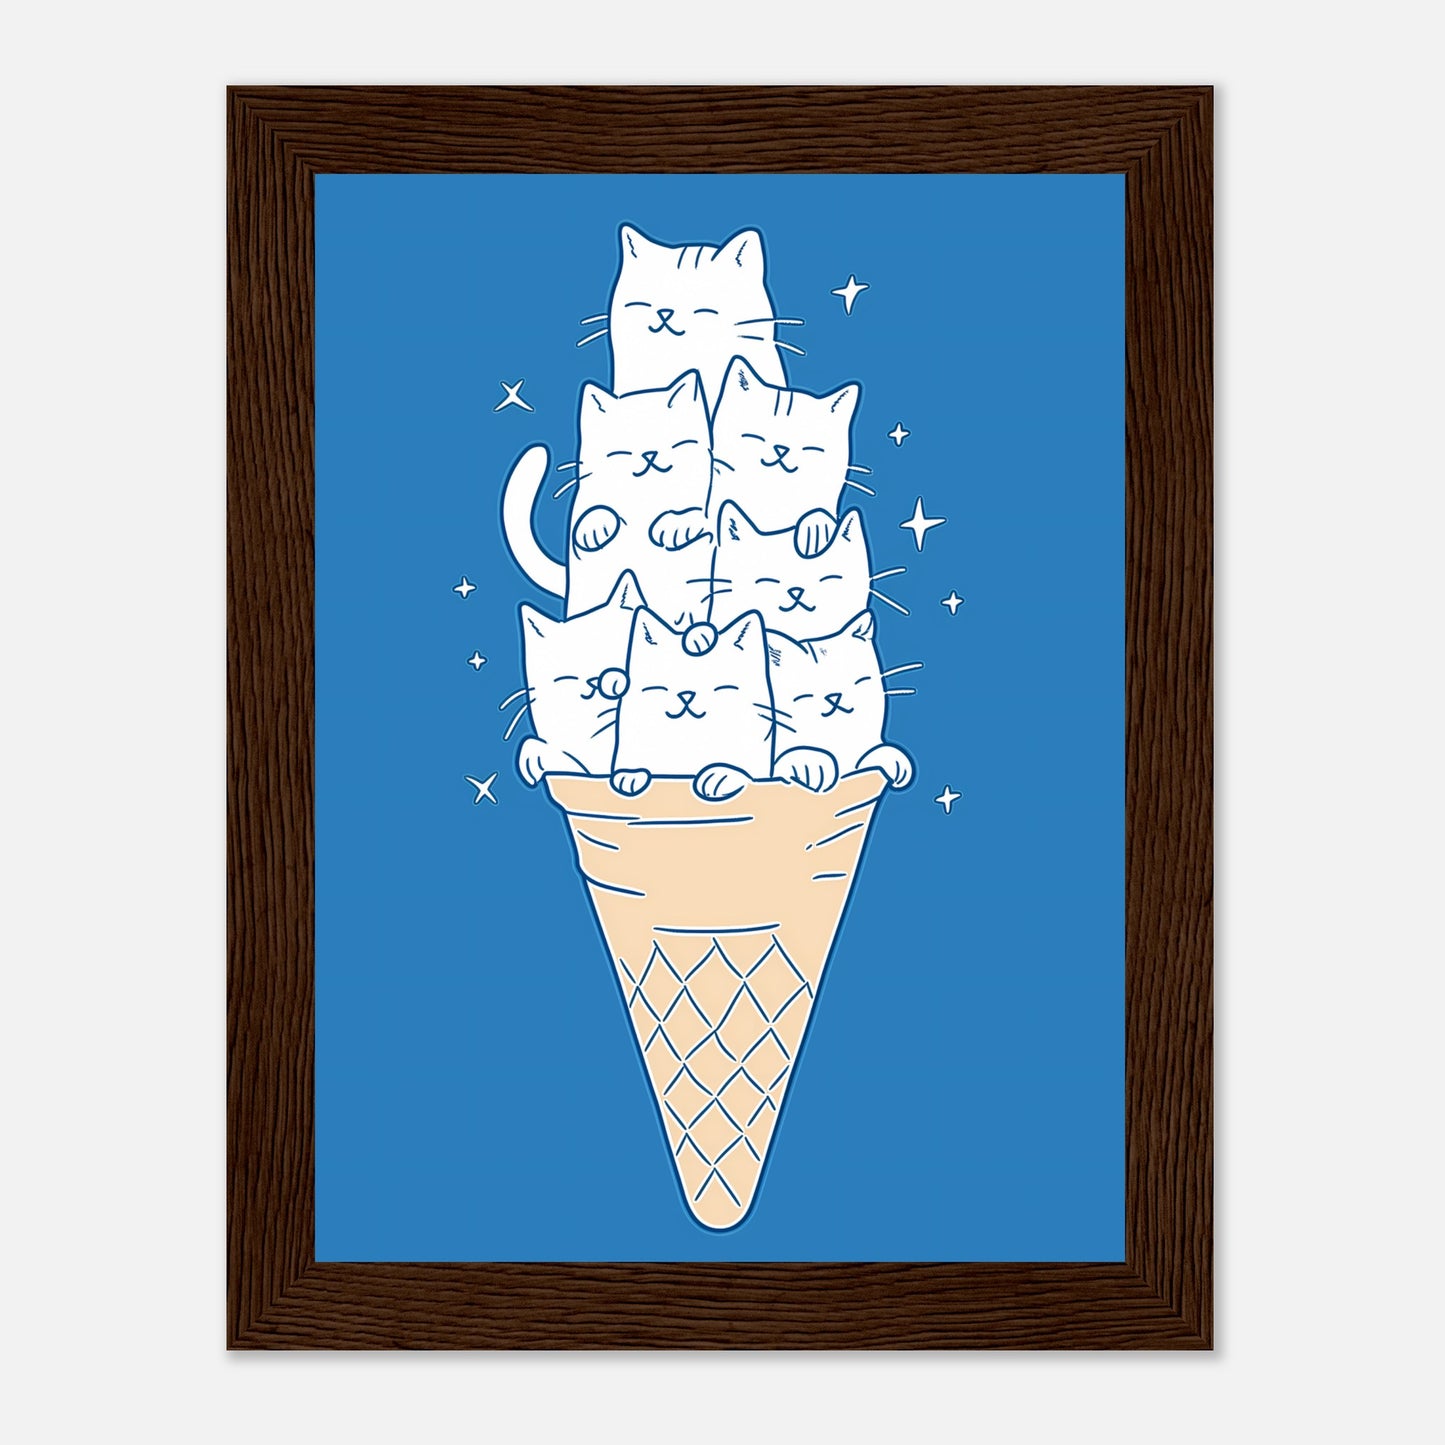 Illustration of a stack of cats in an ice cream cone frame.